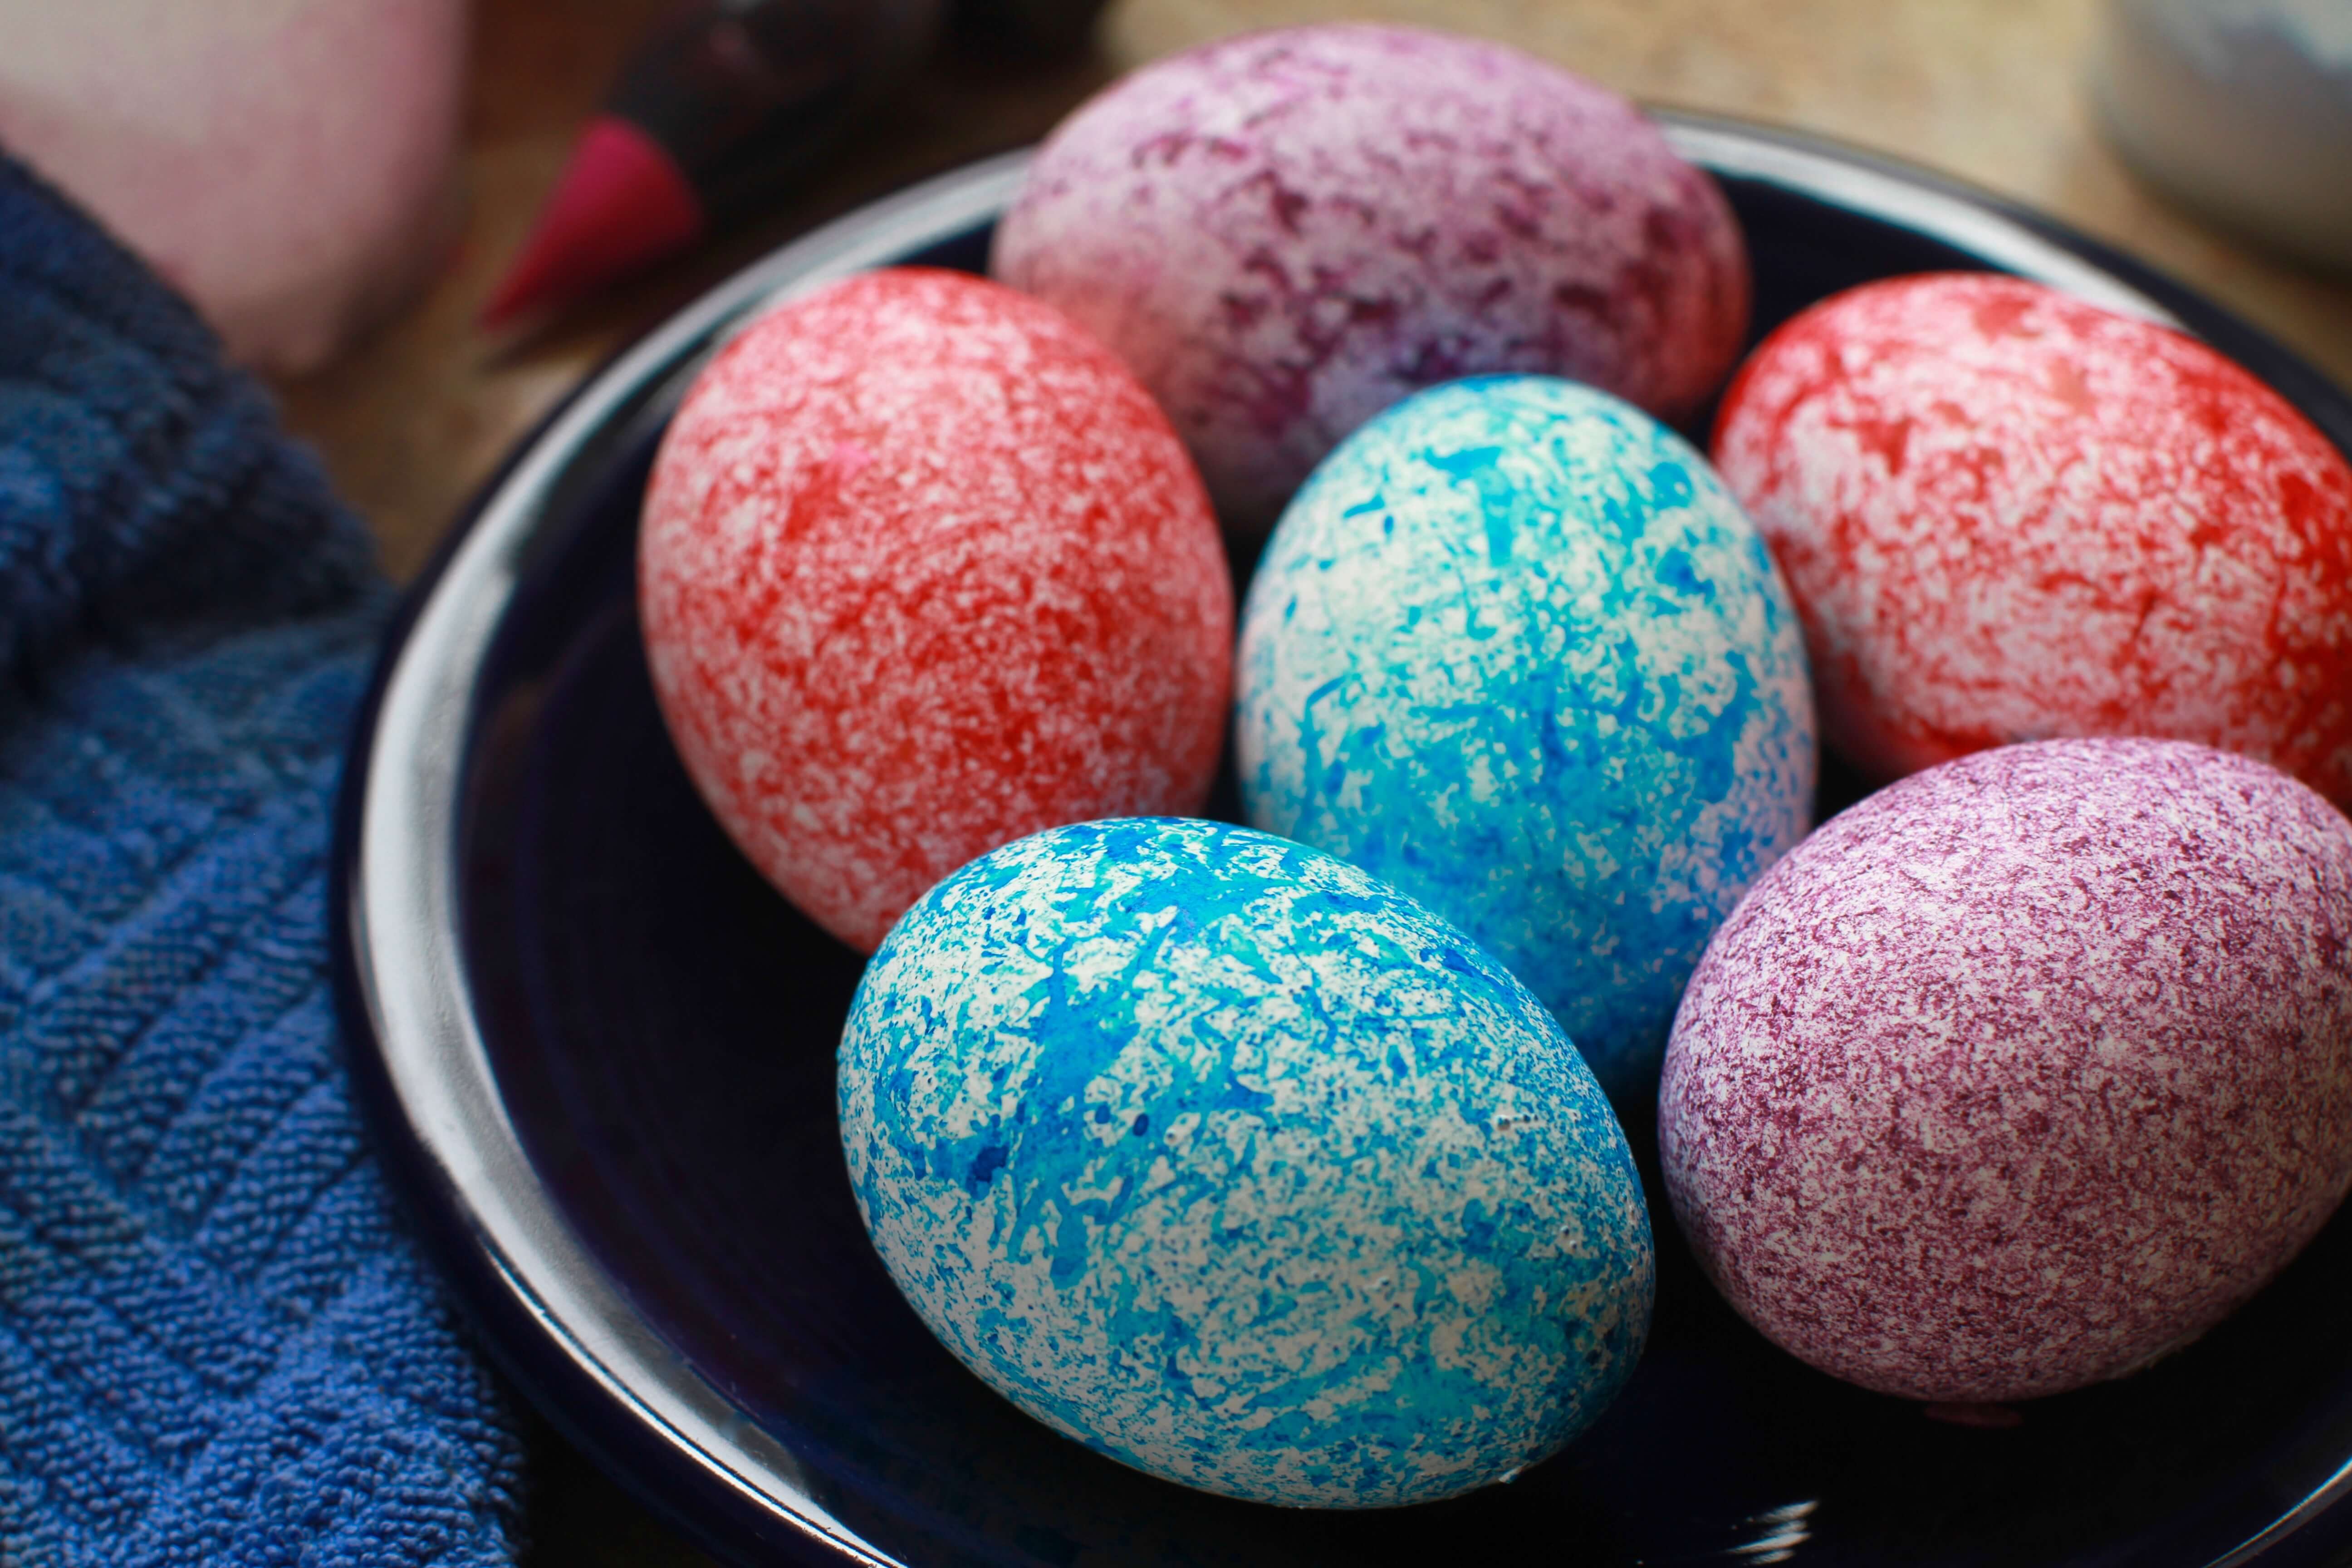 Dye Speckled Easter Eggs Using Rice This Spring Everybodycraves,Mimosa Recipes For Bridal Shower